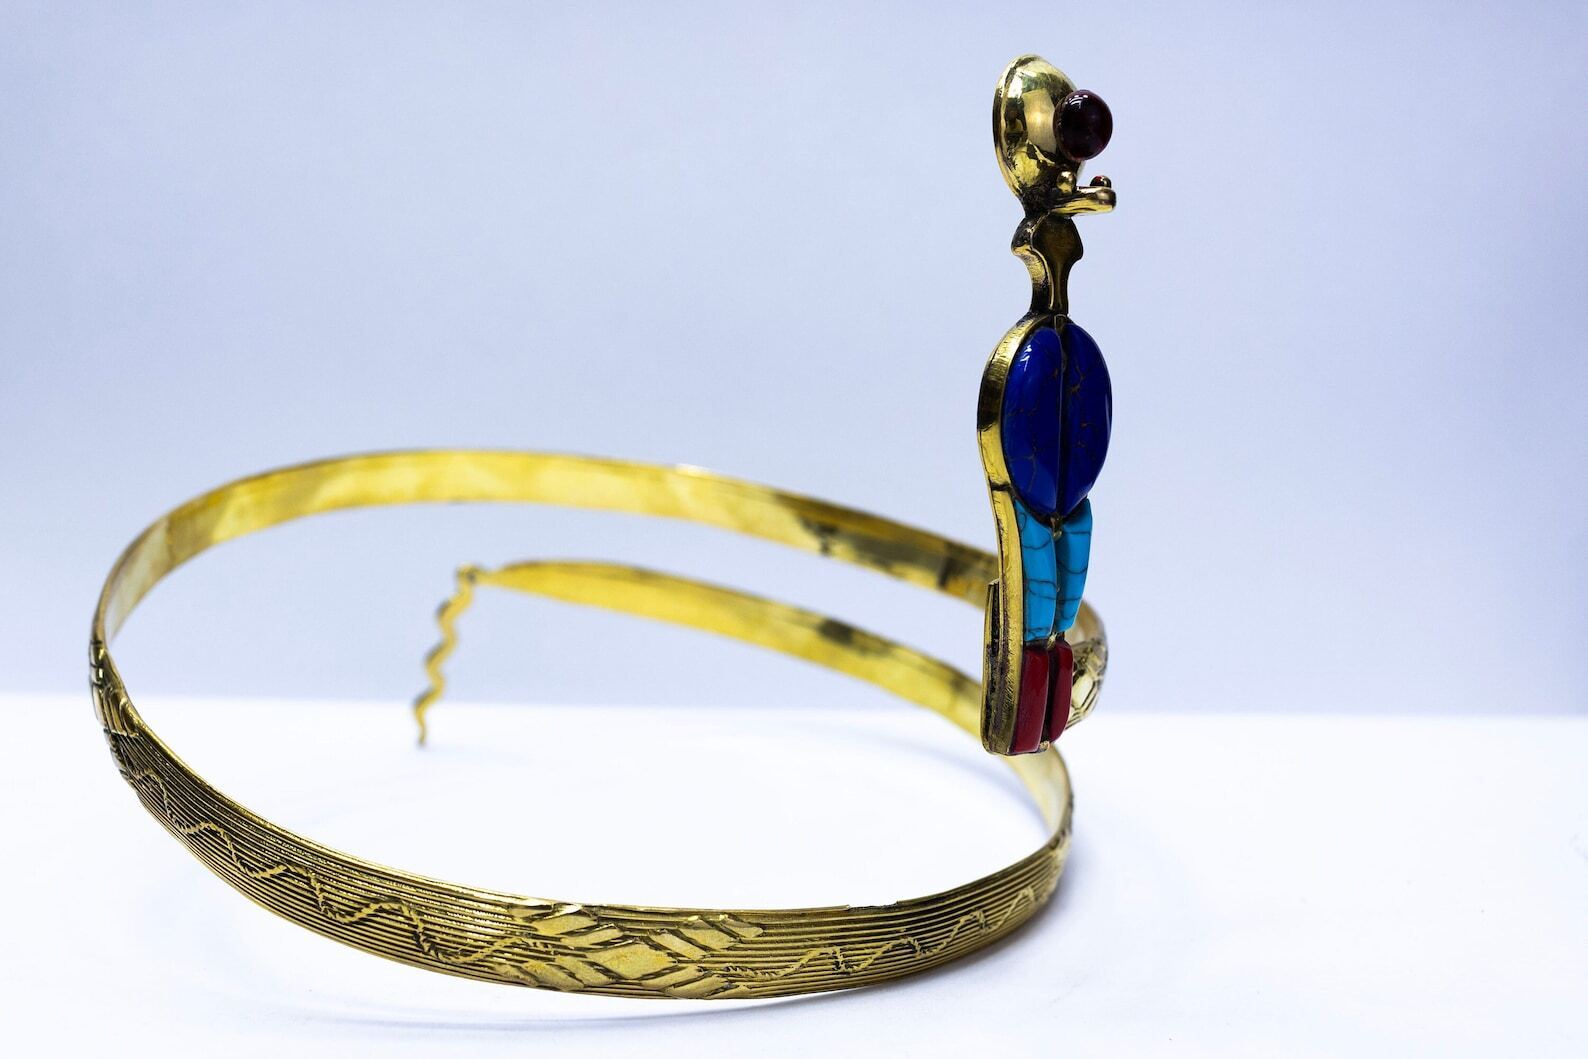 Egyptian crown with the cobra, made in Egypt with care and love